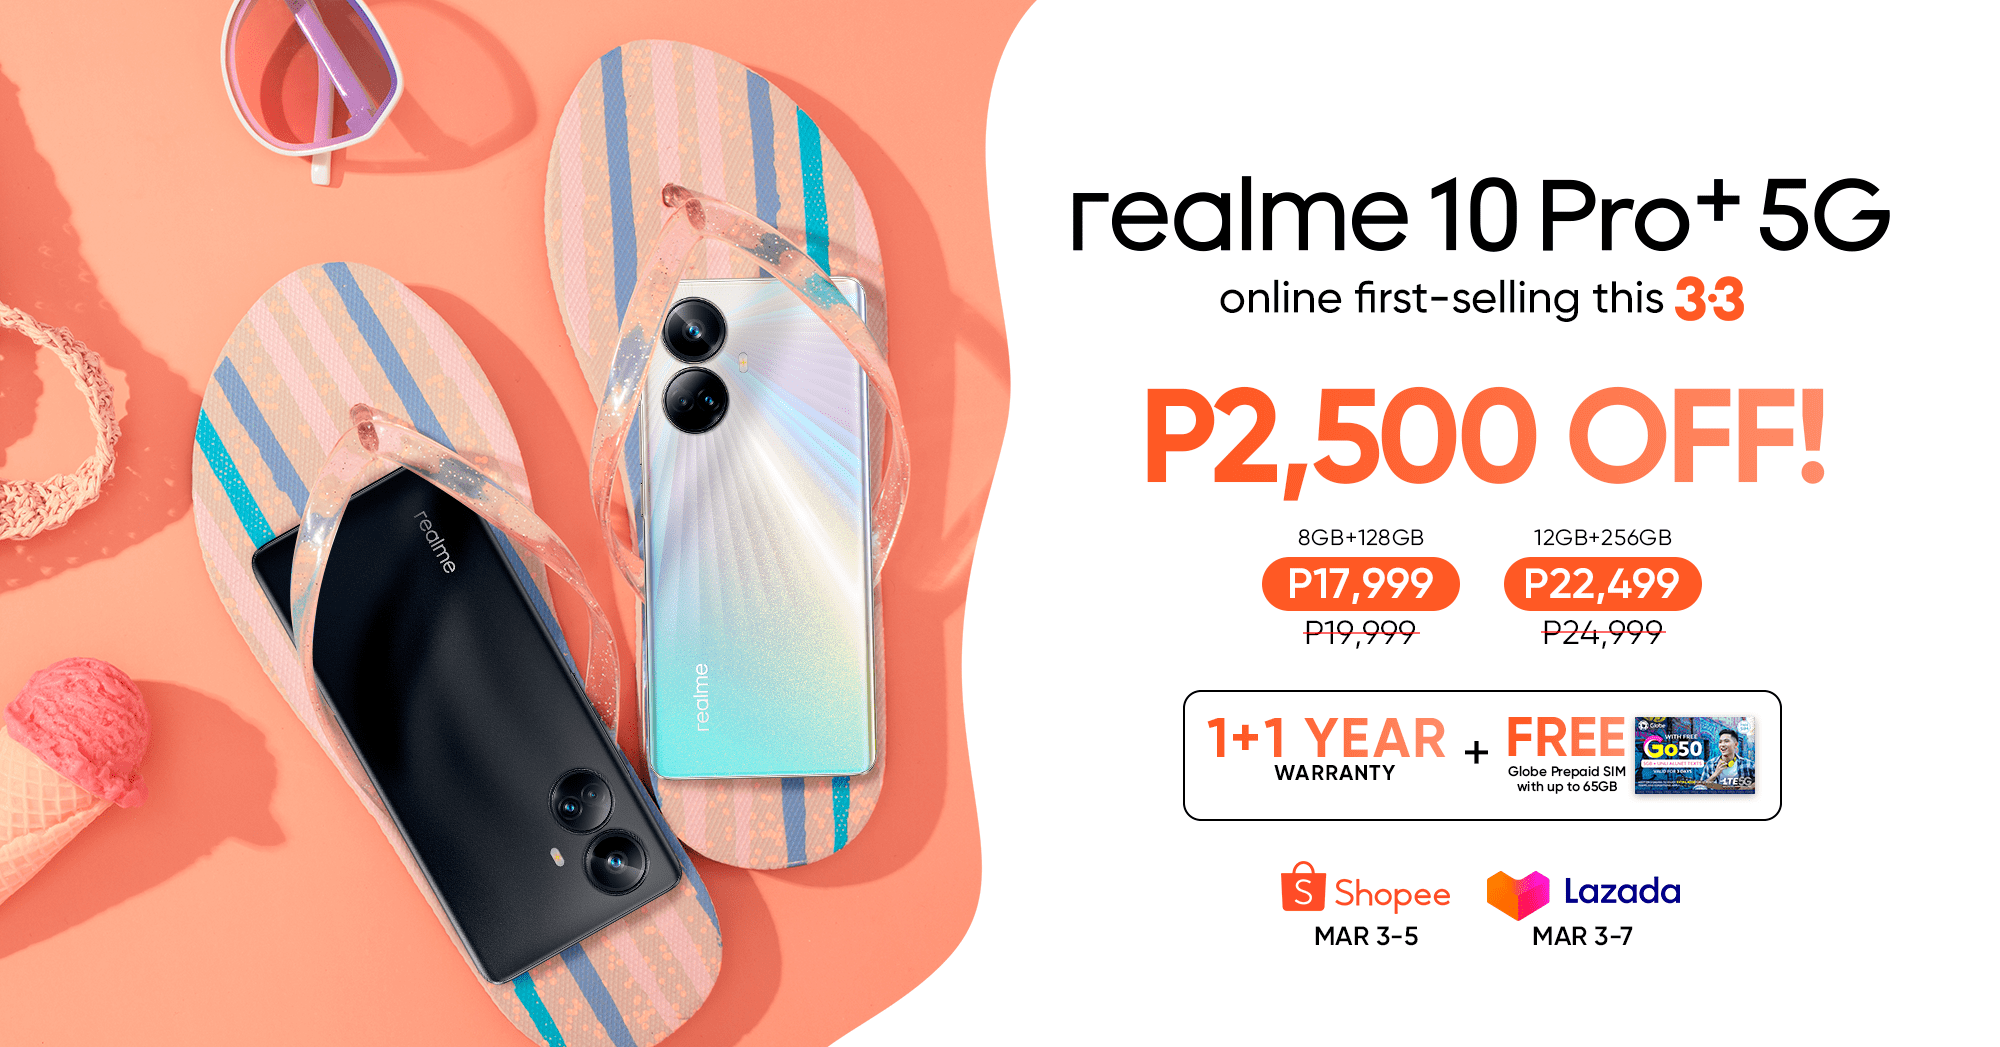 Kickstart your summer with the realme 10 Pro+ 5G_Photo 1